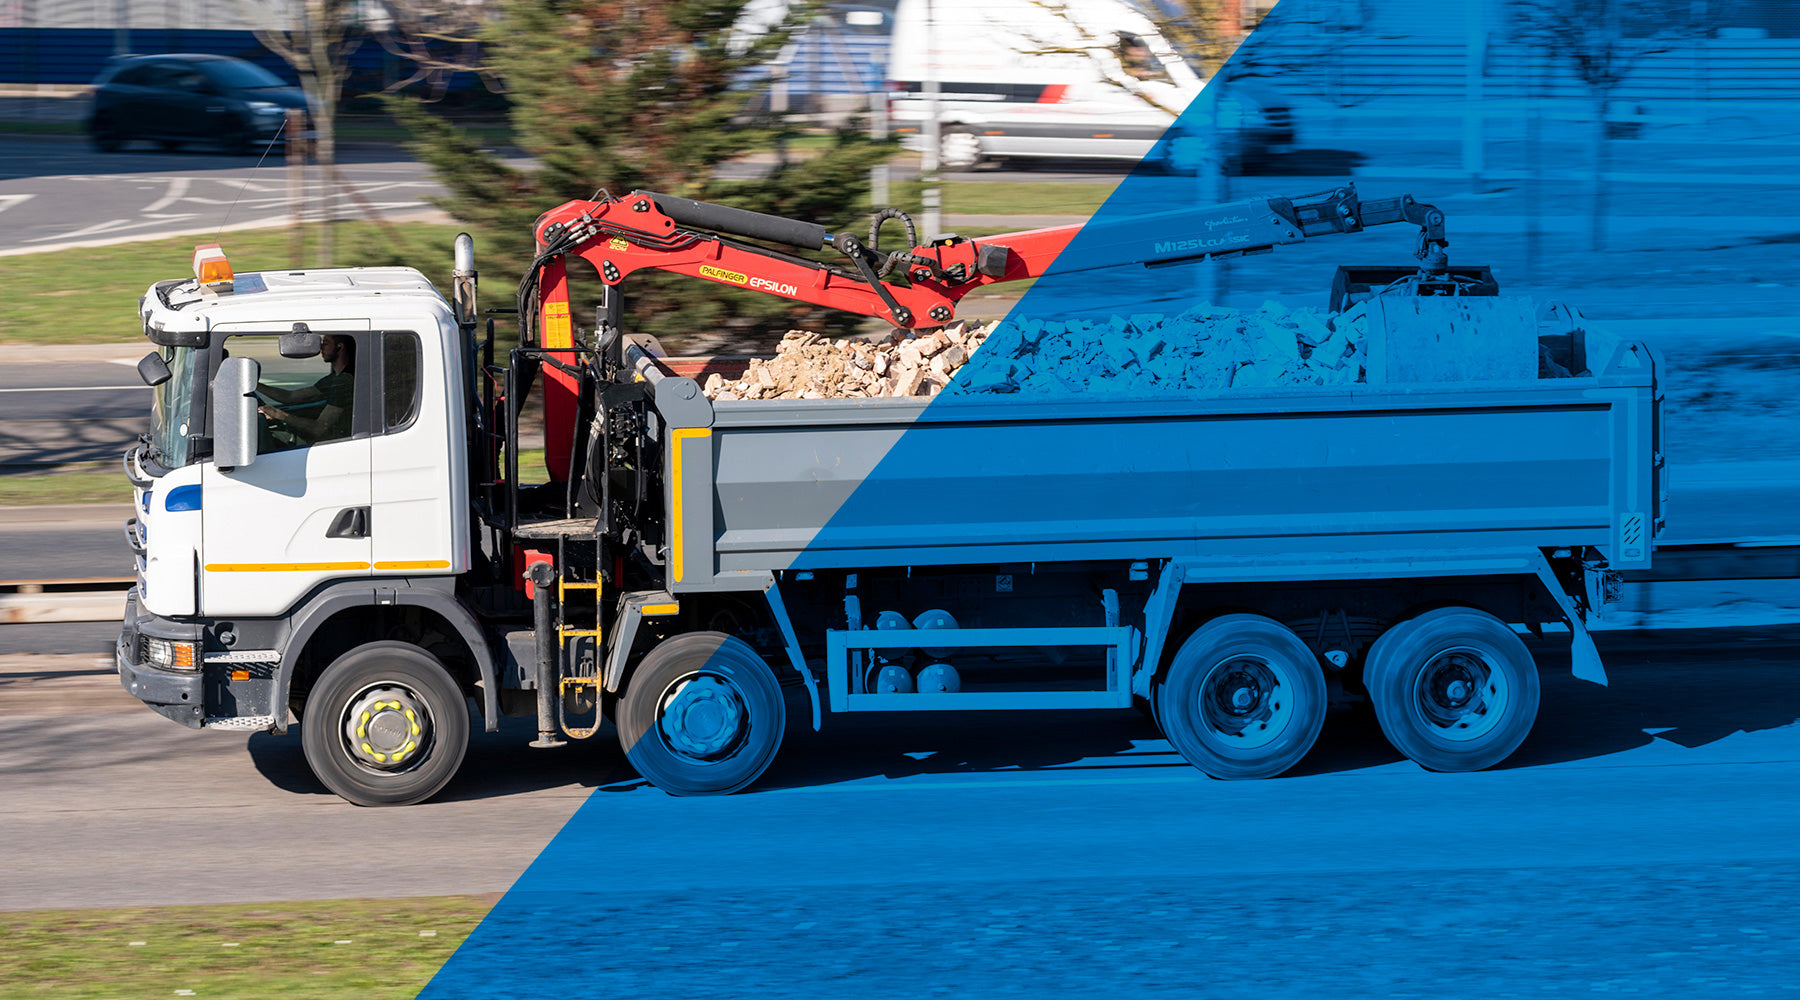 MC Environmental Skip Hire are reliable, flexible and we very much pride ourselves on superb levels of quality and customer service when it comes to your waste needs. Servicing Newport, Cardiff and surrounding areas.